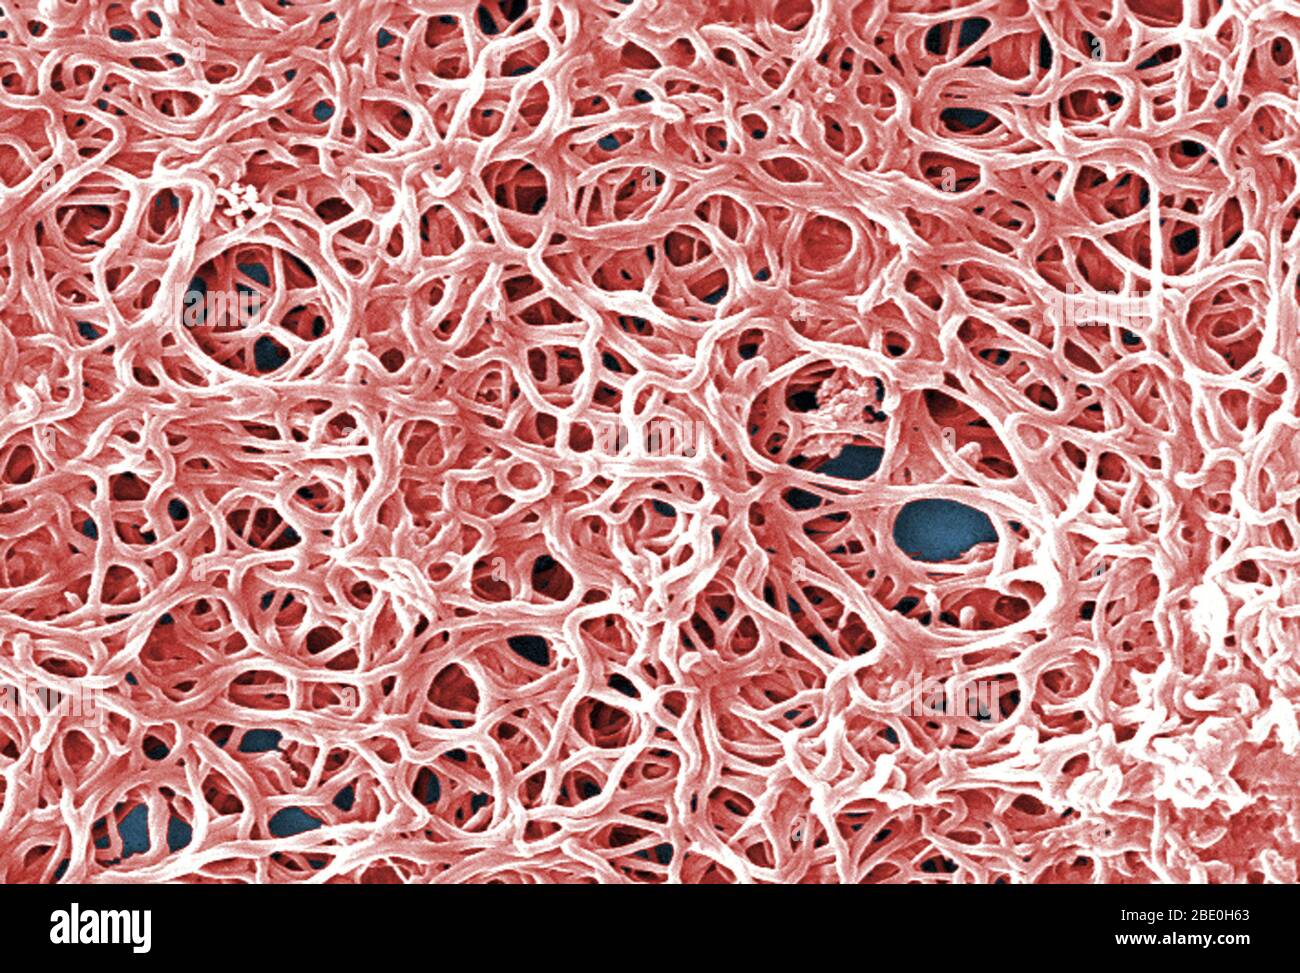 Scanning electron micrograph (SEM) depicts a grouping of numerous Gram-negative, anaerobic, Borrelia burgdorferi bacteria, which had been derived from a pure culture. This pathogenic organism is responsible for causing the illness Lyme disease, a zoonotic, vector-borne ailment, transmitted to humans by way of a tick bite. B. burgdorferi belongs to a group of bacteria called spirochetes, whose appearance resembles a coiled spring. B. burgdorferi bacteria can infect several parts of the body, producing different symptoms at different times. Not all patients with Lyme disease will have all sympto Stock Photo